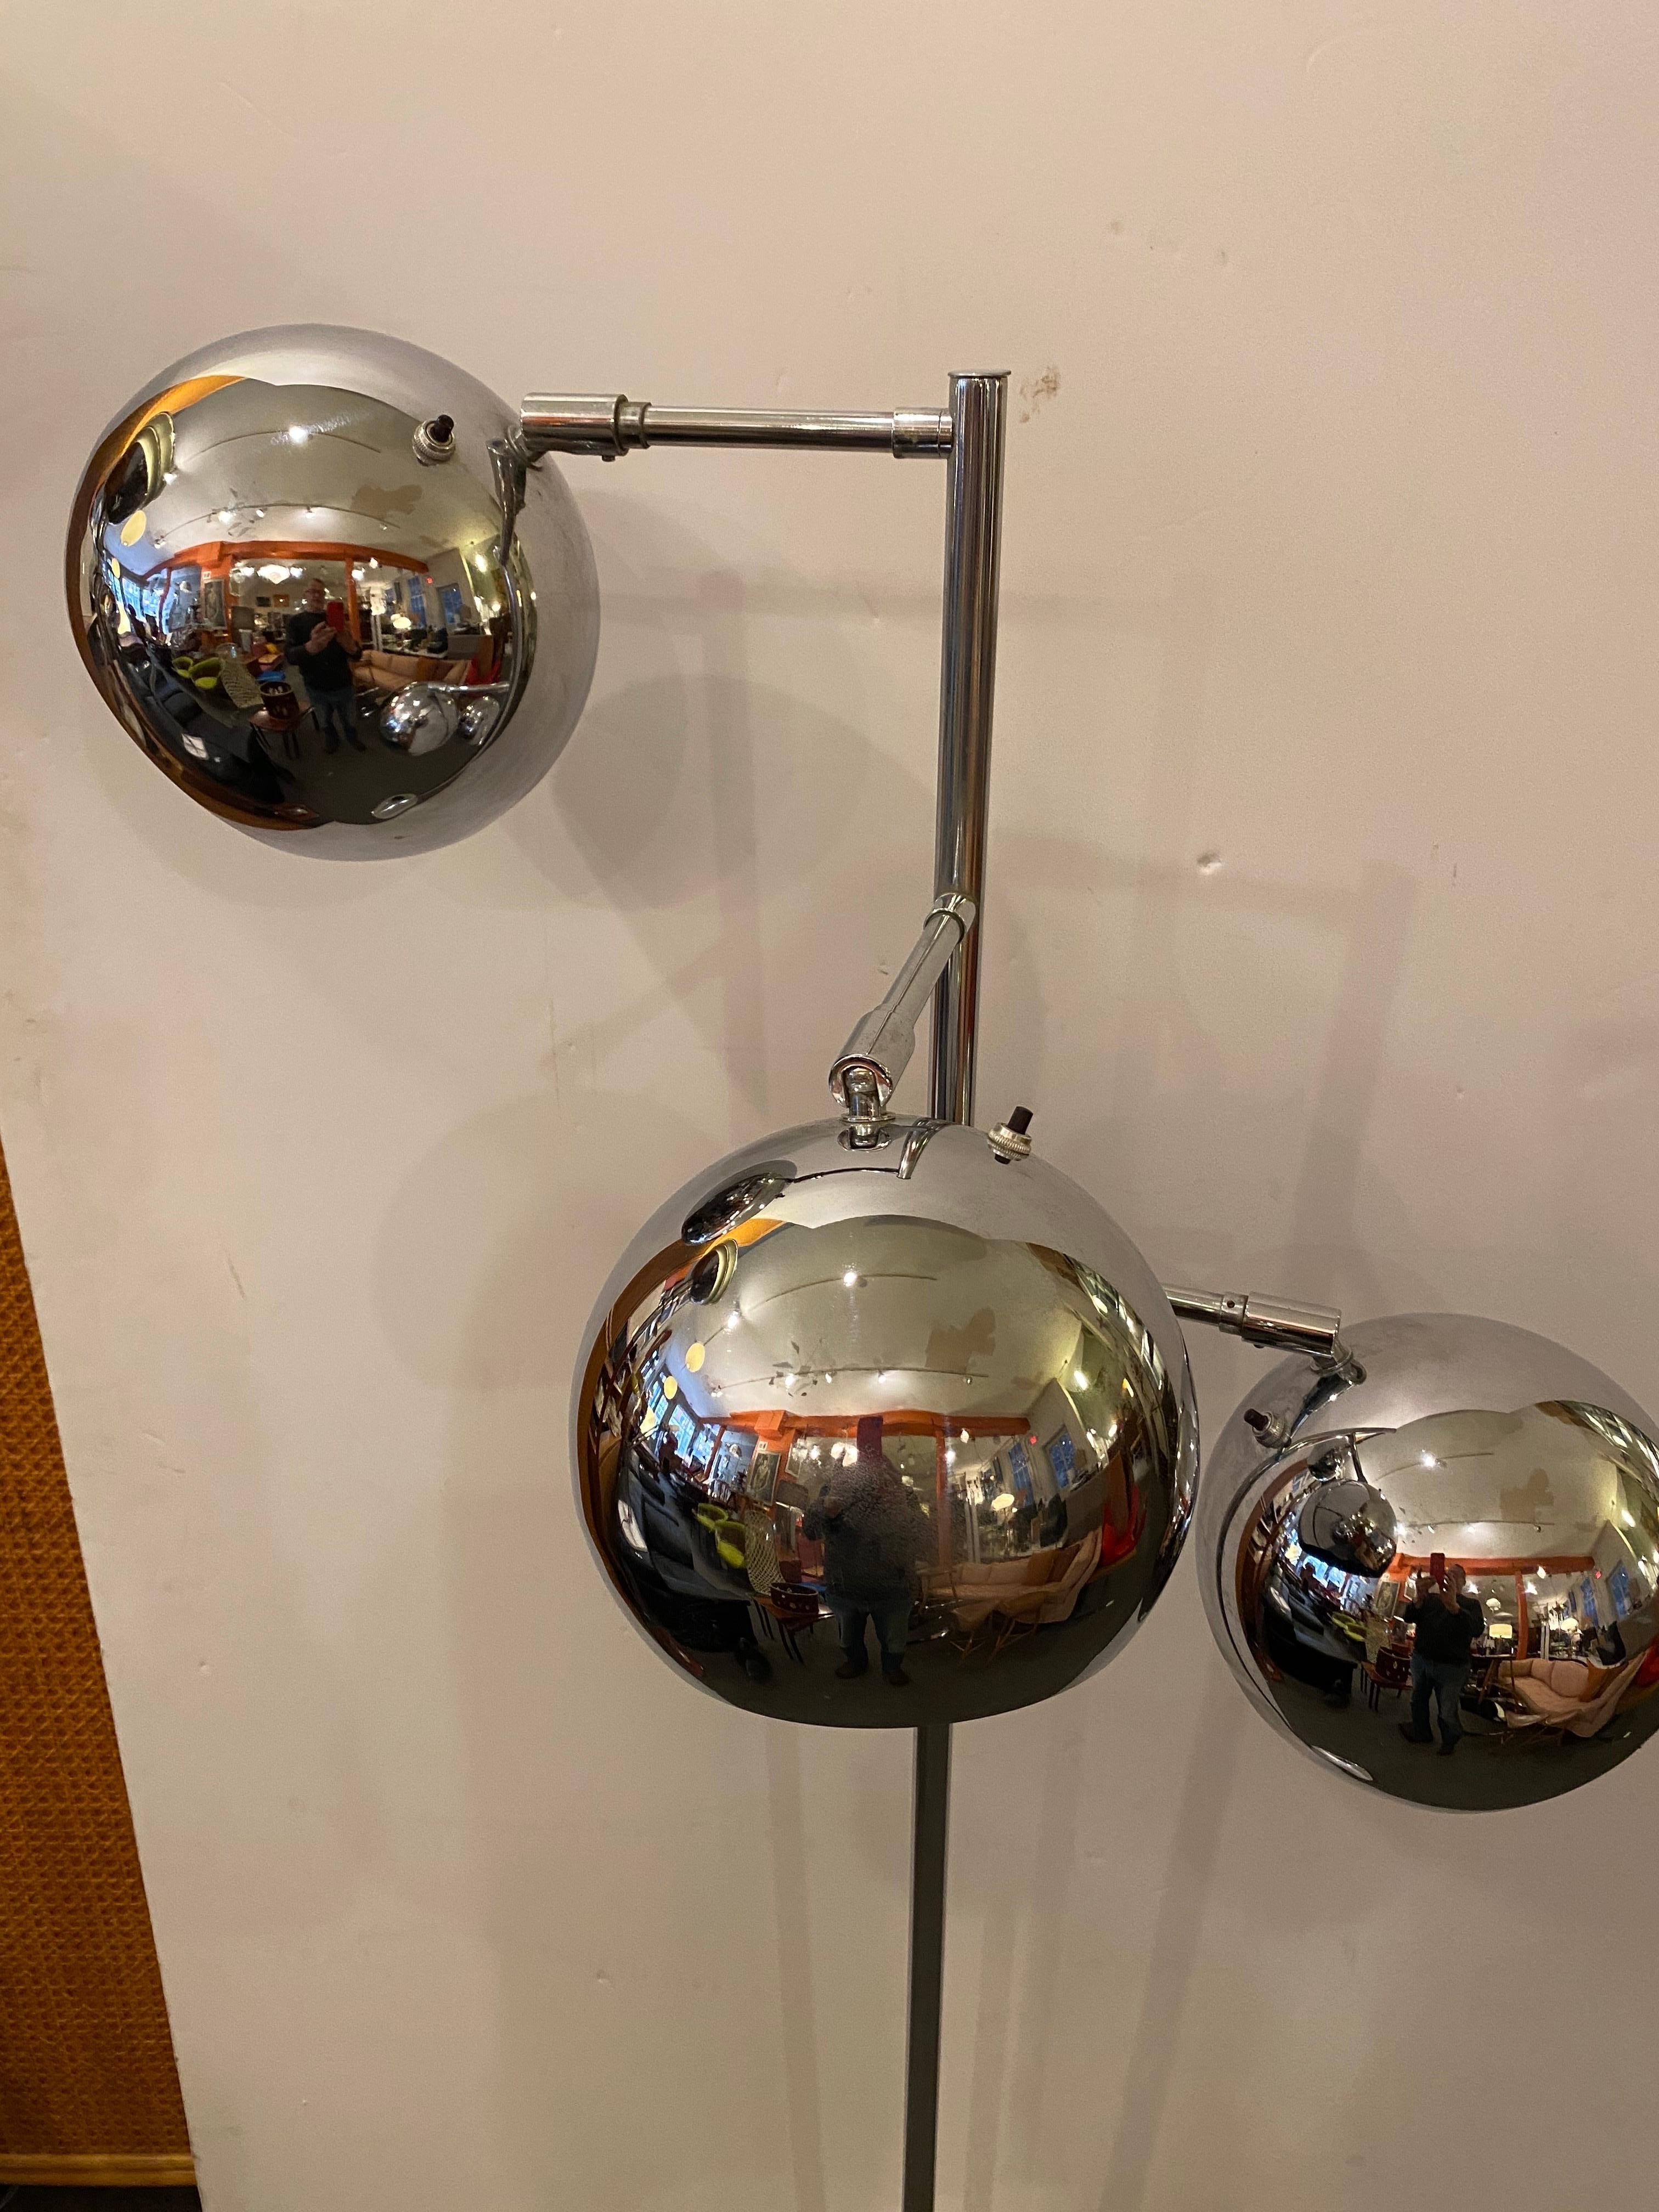 Koch and Lowy 3 Head Chrome Floor Lamp.  Chrome Ball shades each have their own switches and rotate easily to adjust direction of light.  Chrome is very clean!